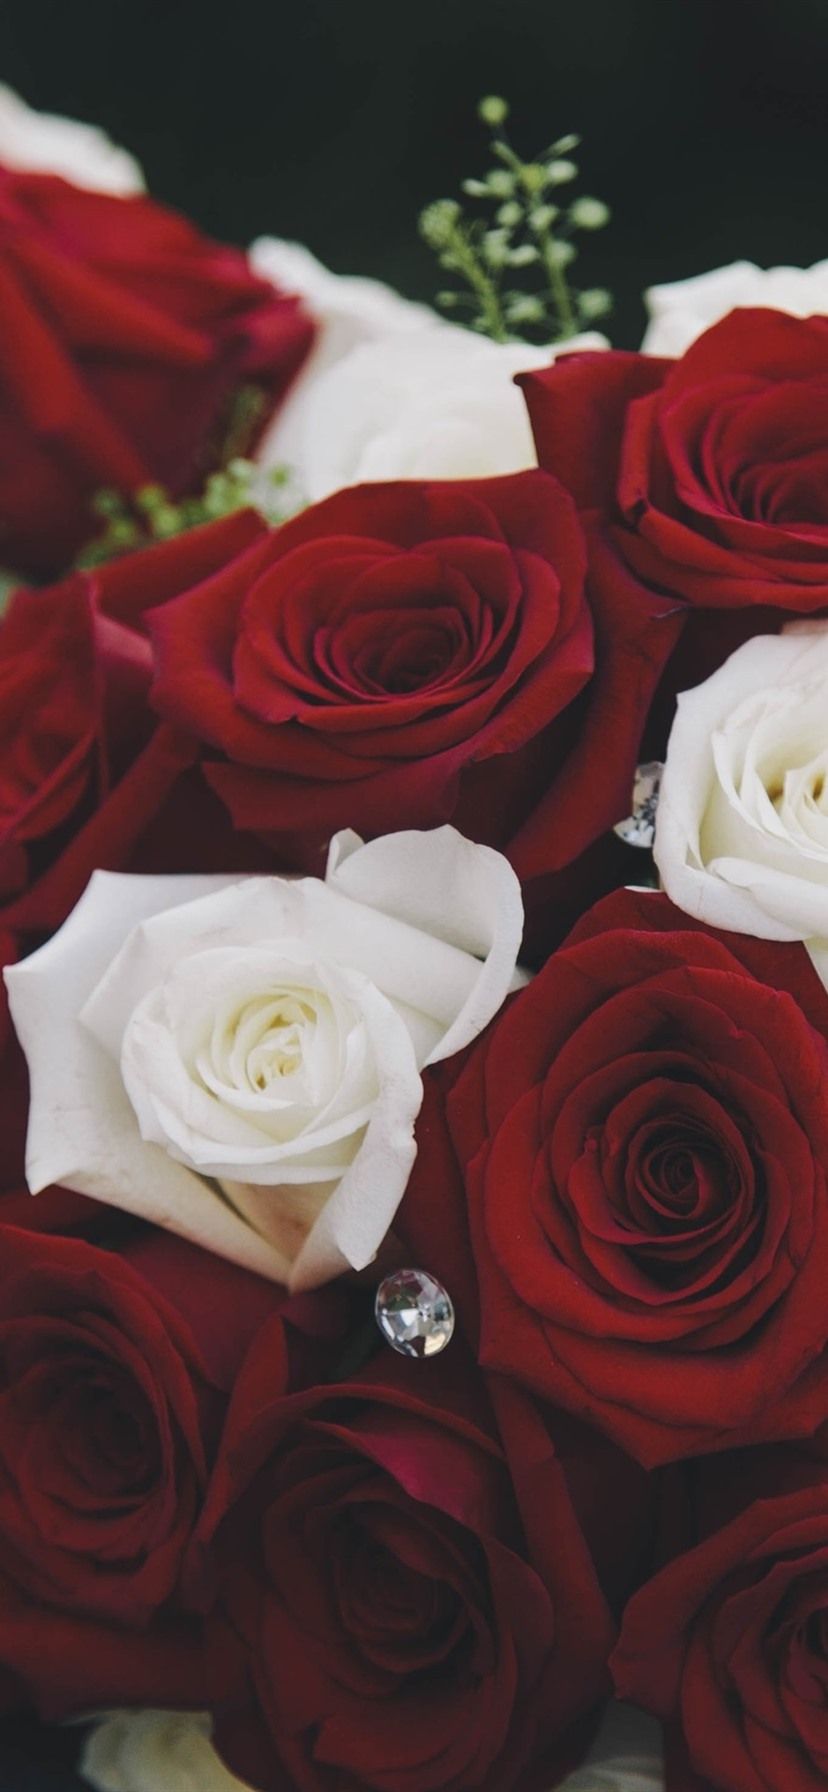 Bouquet, Red And White Roses 1080x1920 IPhone 8 7 6 6S Plus Wallpaper, Background, Picture, Image